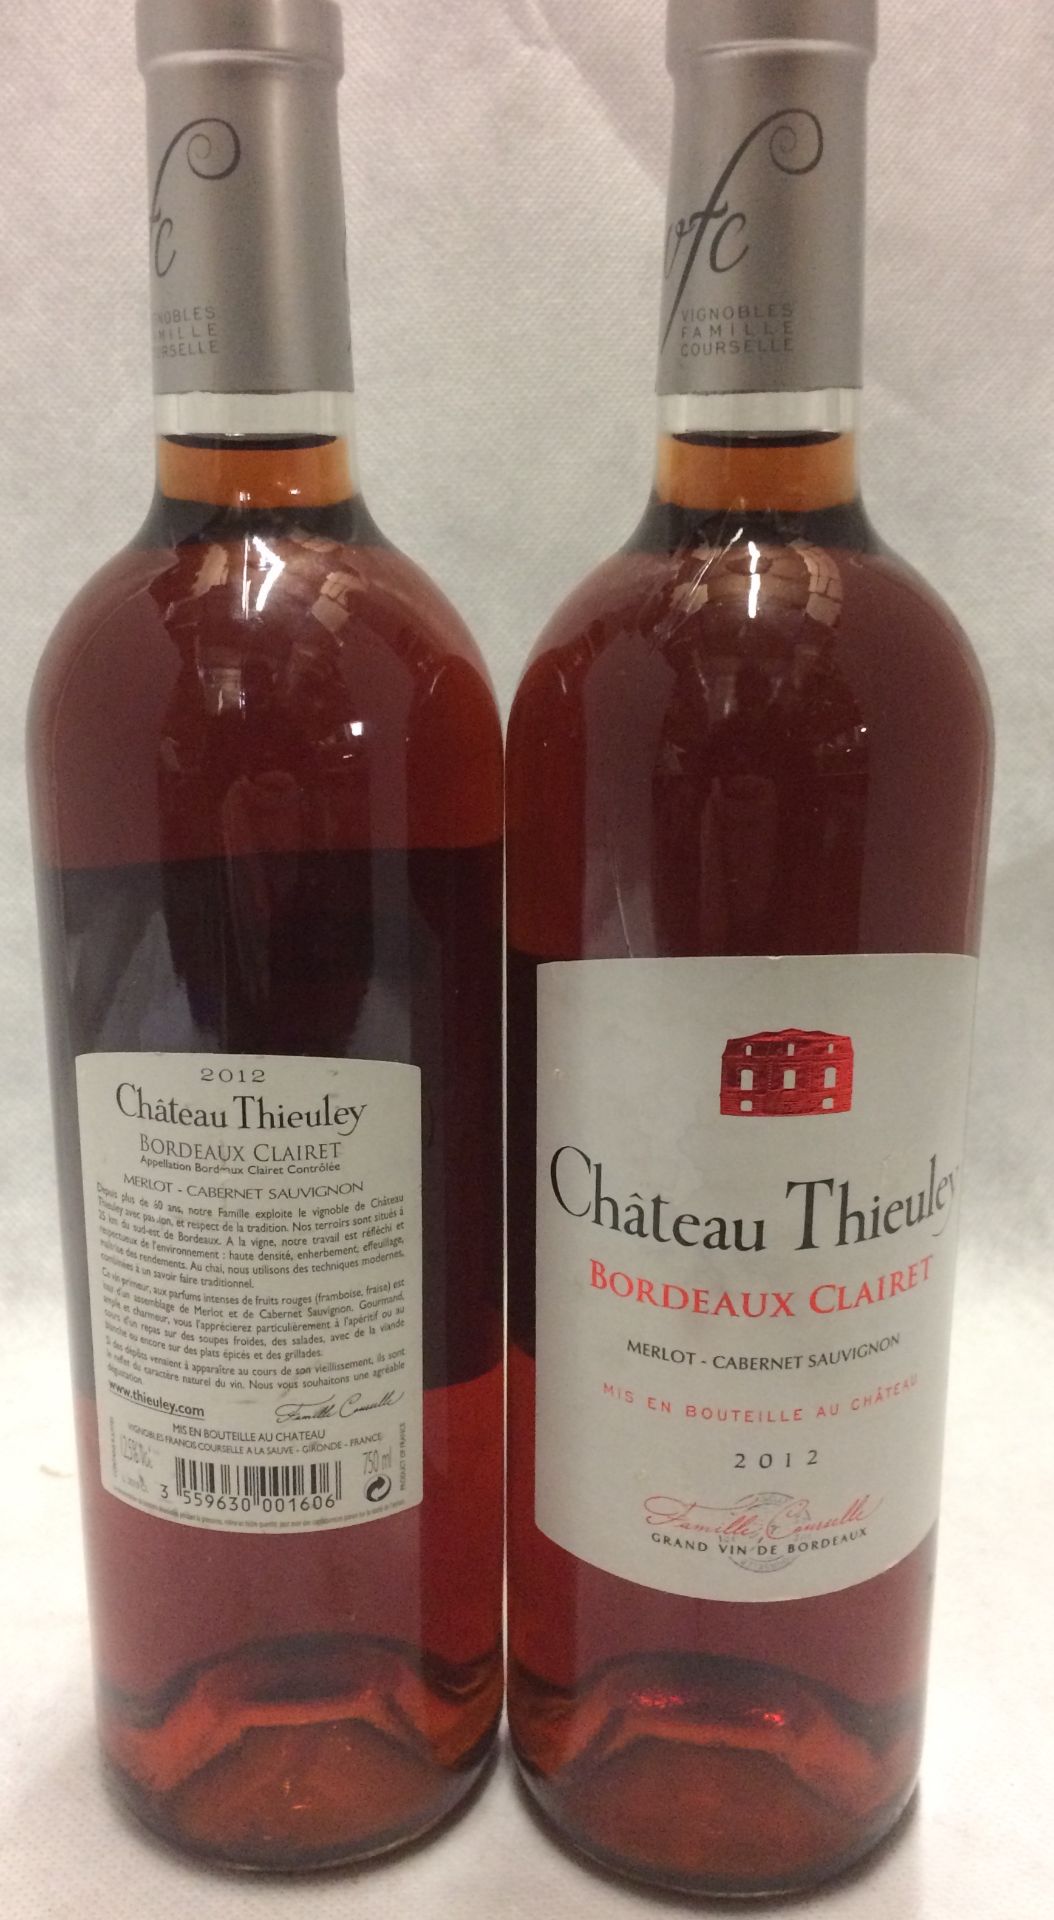 2 x 750ml bottles of Chateau Thiealey Bo